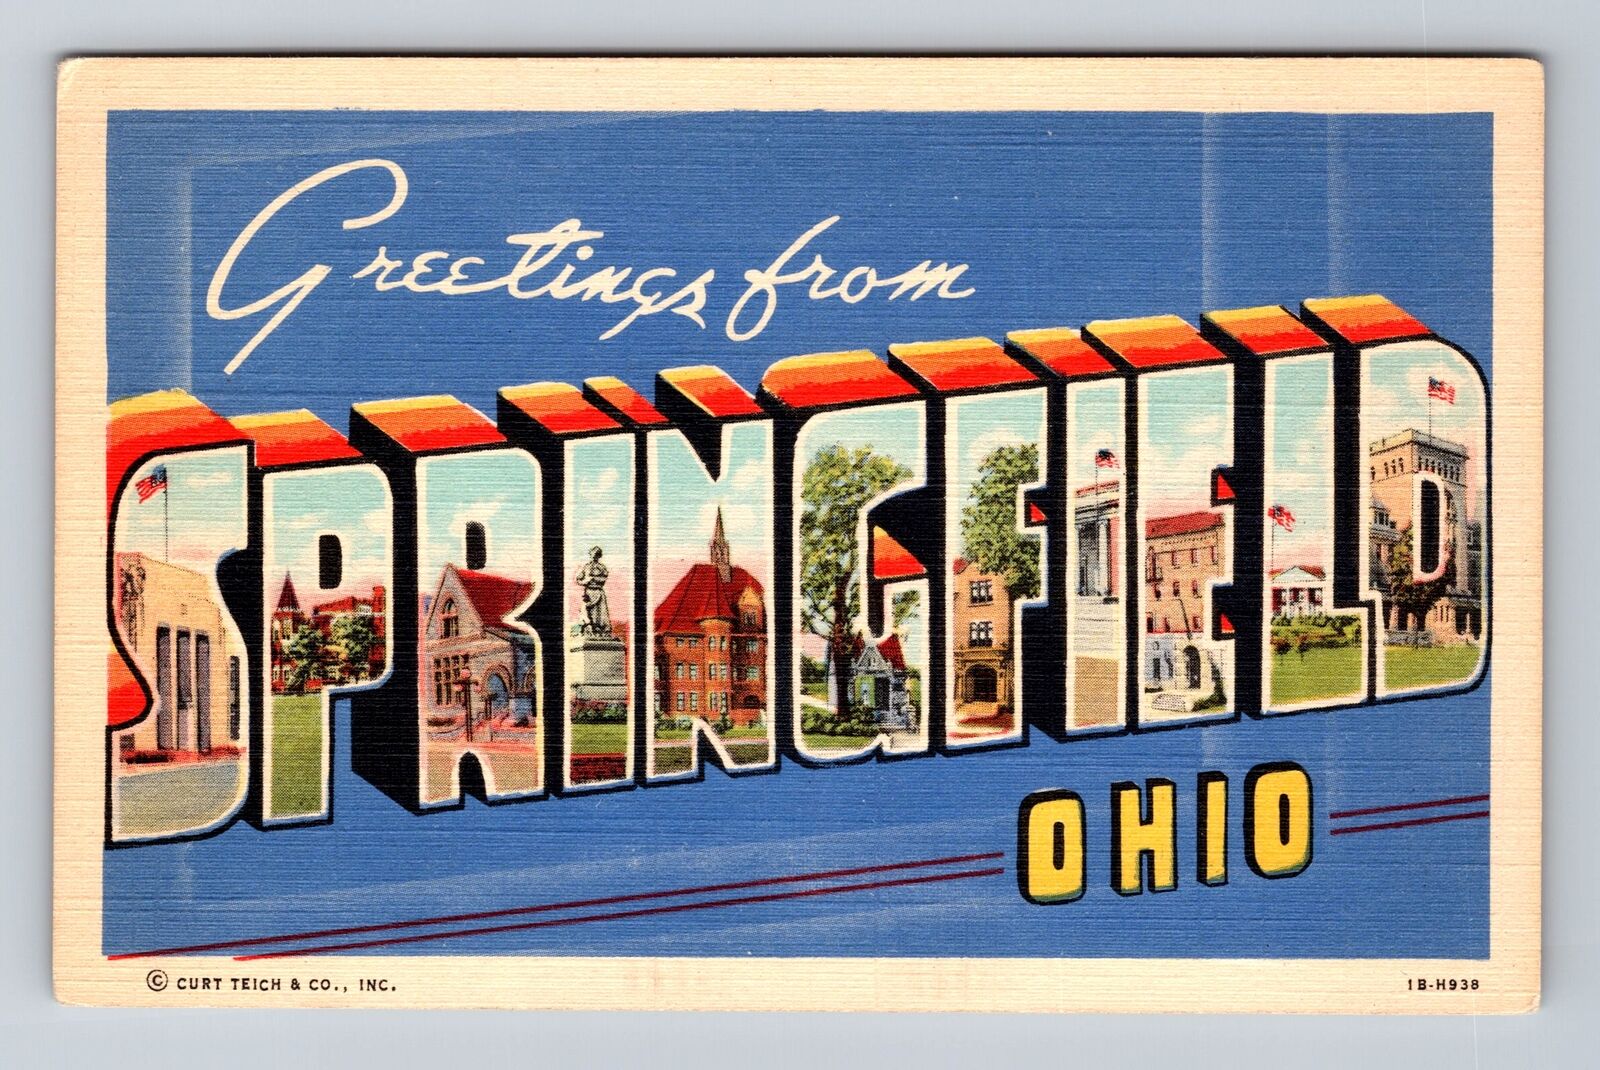 Springfield OH-Ohio, Scenic LARGE LETTER GREETINGS, Antique Vintage Postcard